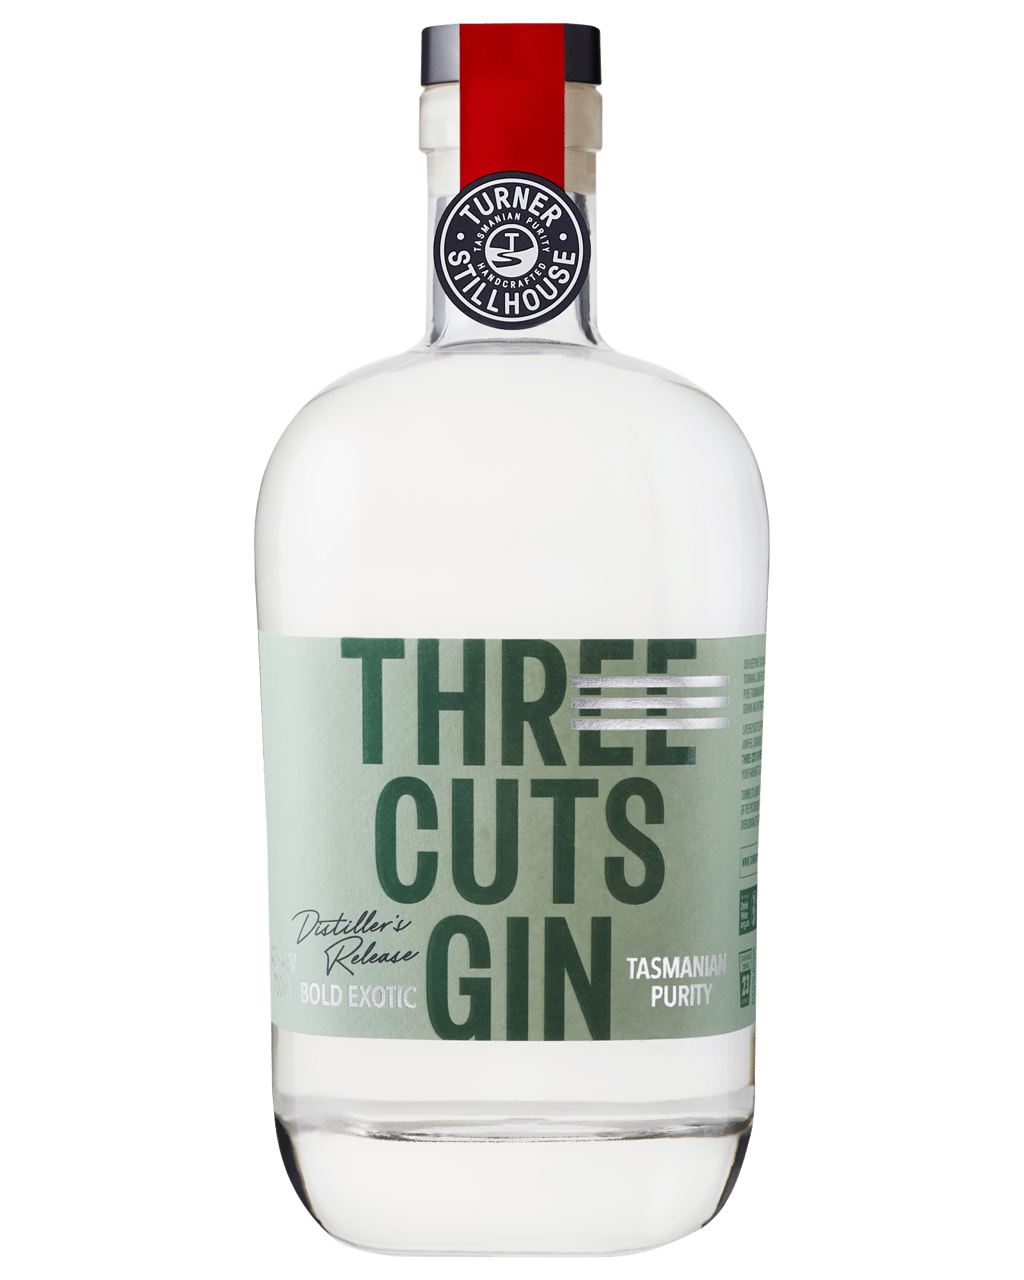 Three Cuts Gin Distillers Release Gin 700ml Unbeatable Prices Buy Online Best Deals With